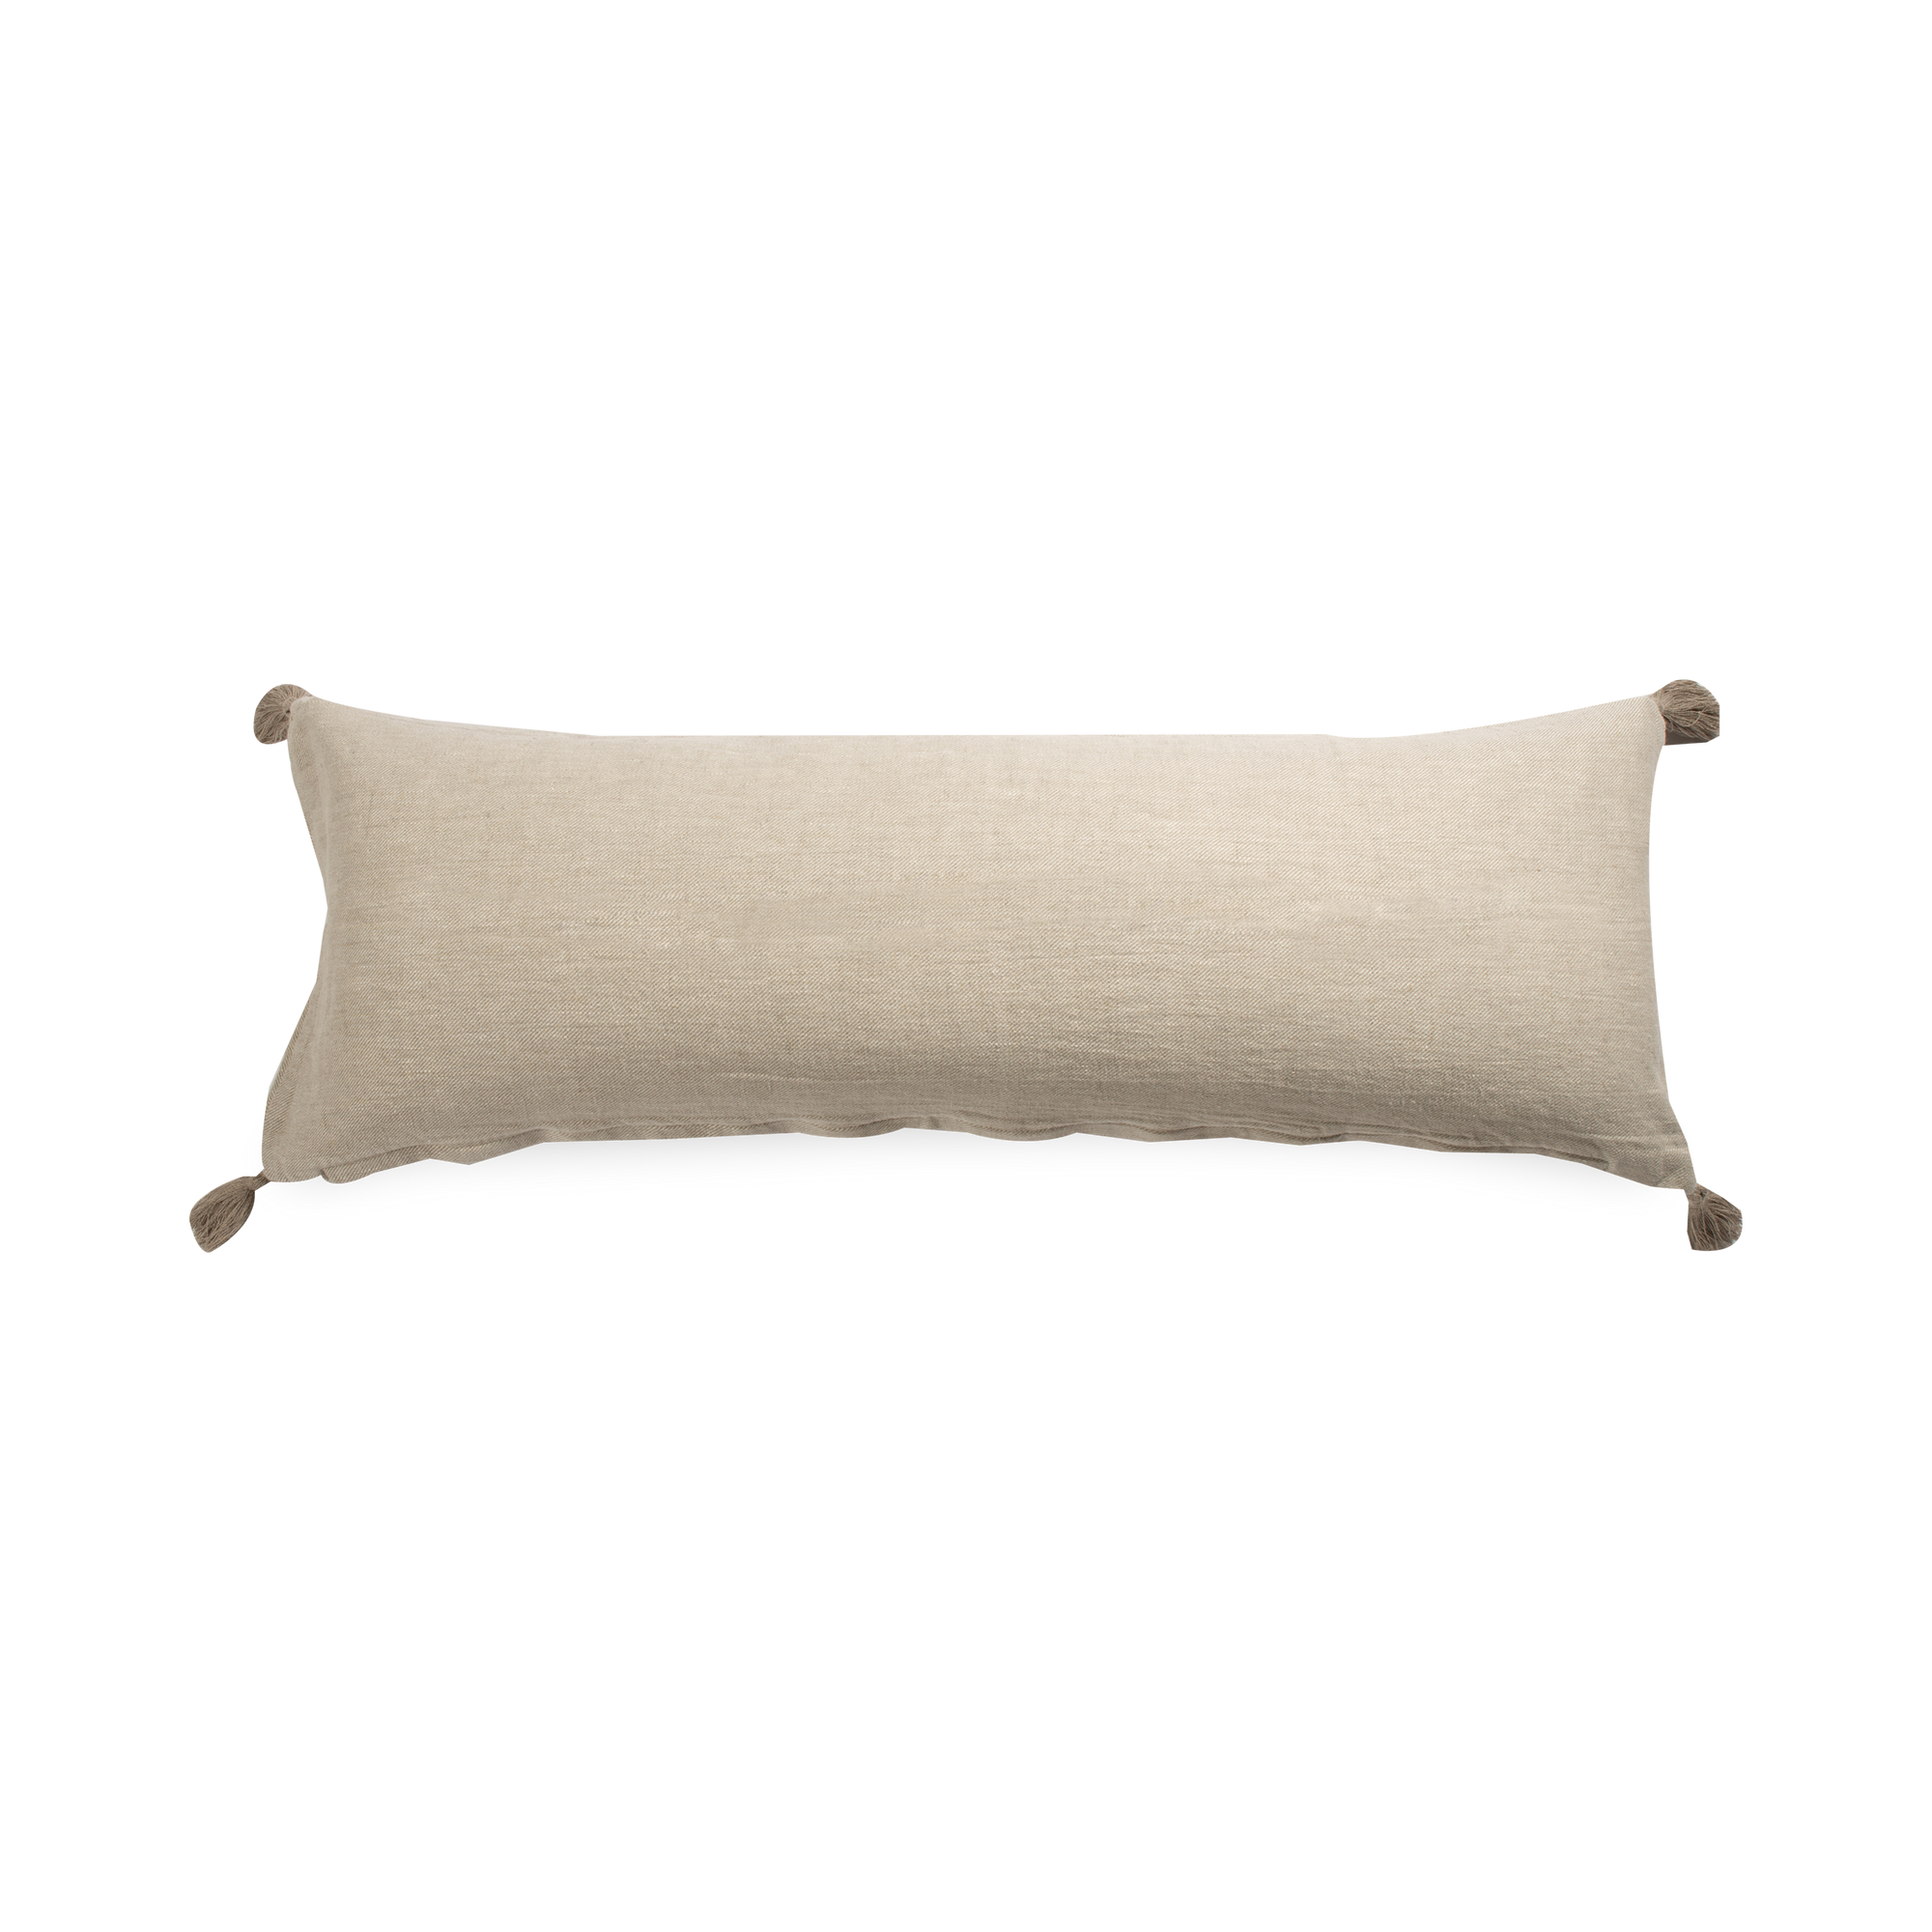 This pillow features a stone-washed linen cover in a flax hue with a tassel in each corner.